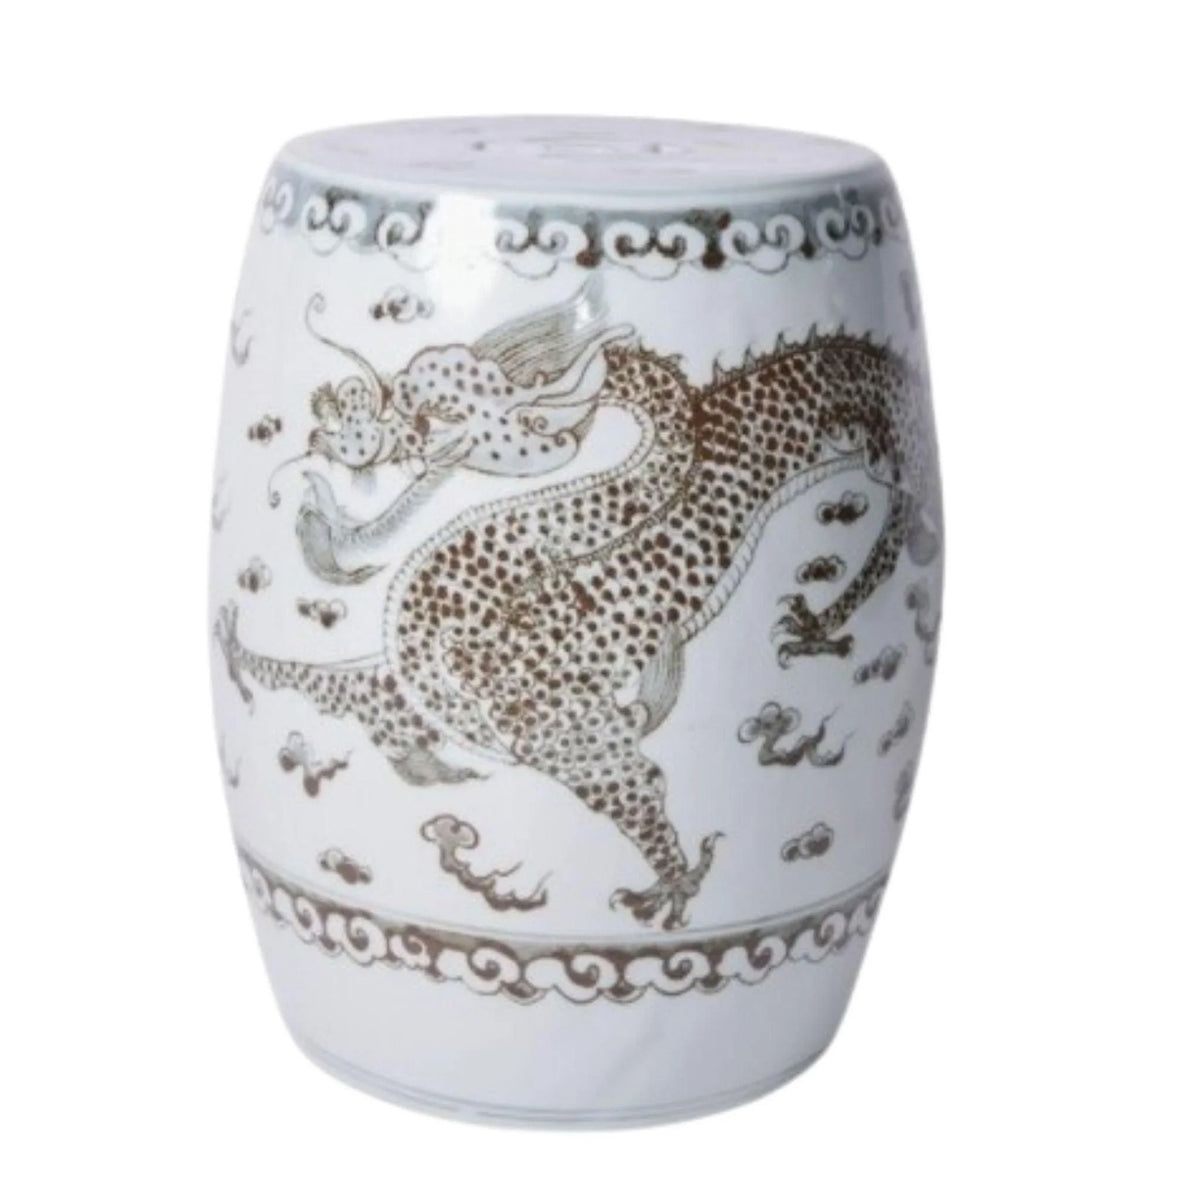 Hong Wu Dragon Porcelain Garden Stool | The Well Appointed House, LLC